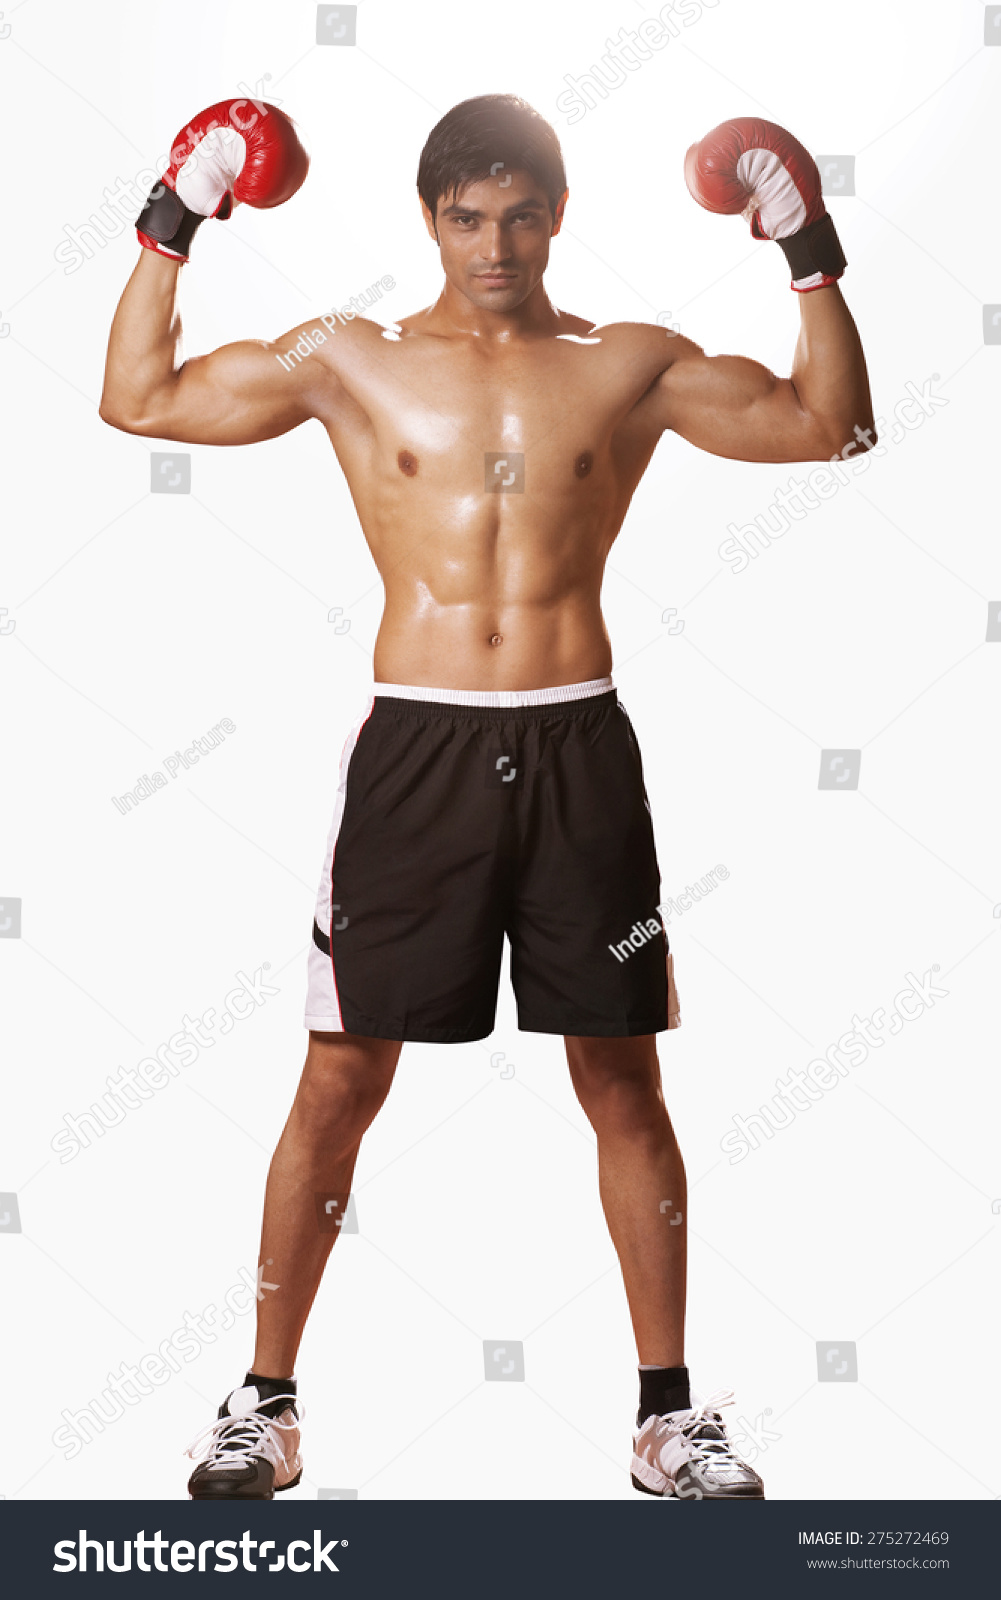 Full Length Portrait Young Male Boxer Stock Photo 275272469 - Shutterstock